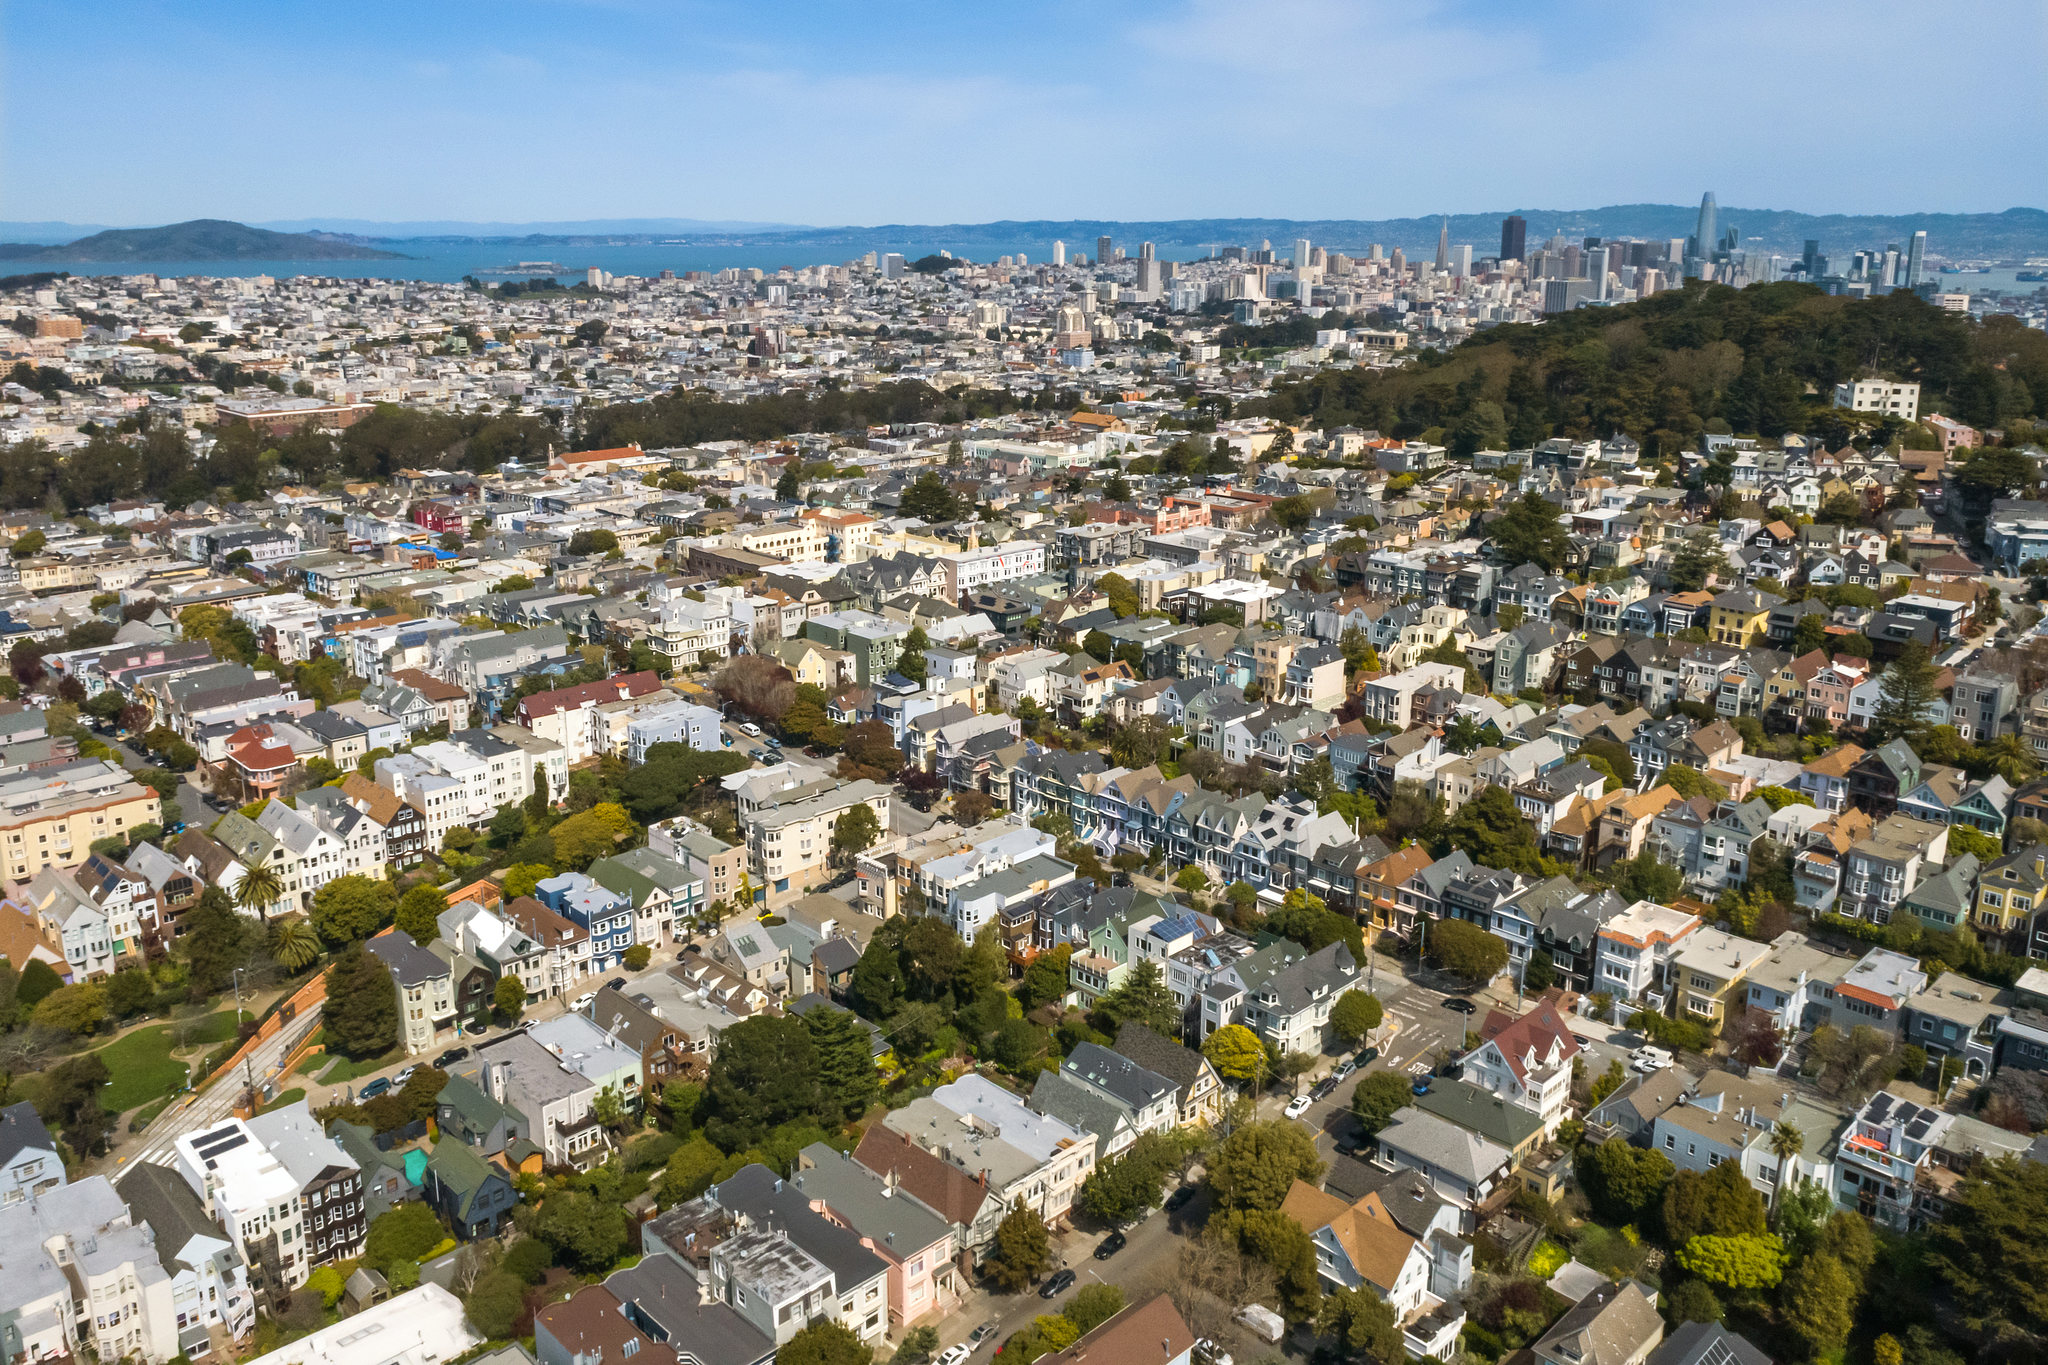 Property Photo: Aerial view looking towards downtown San Francisco